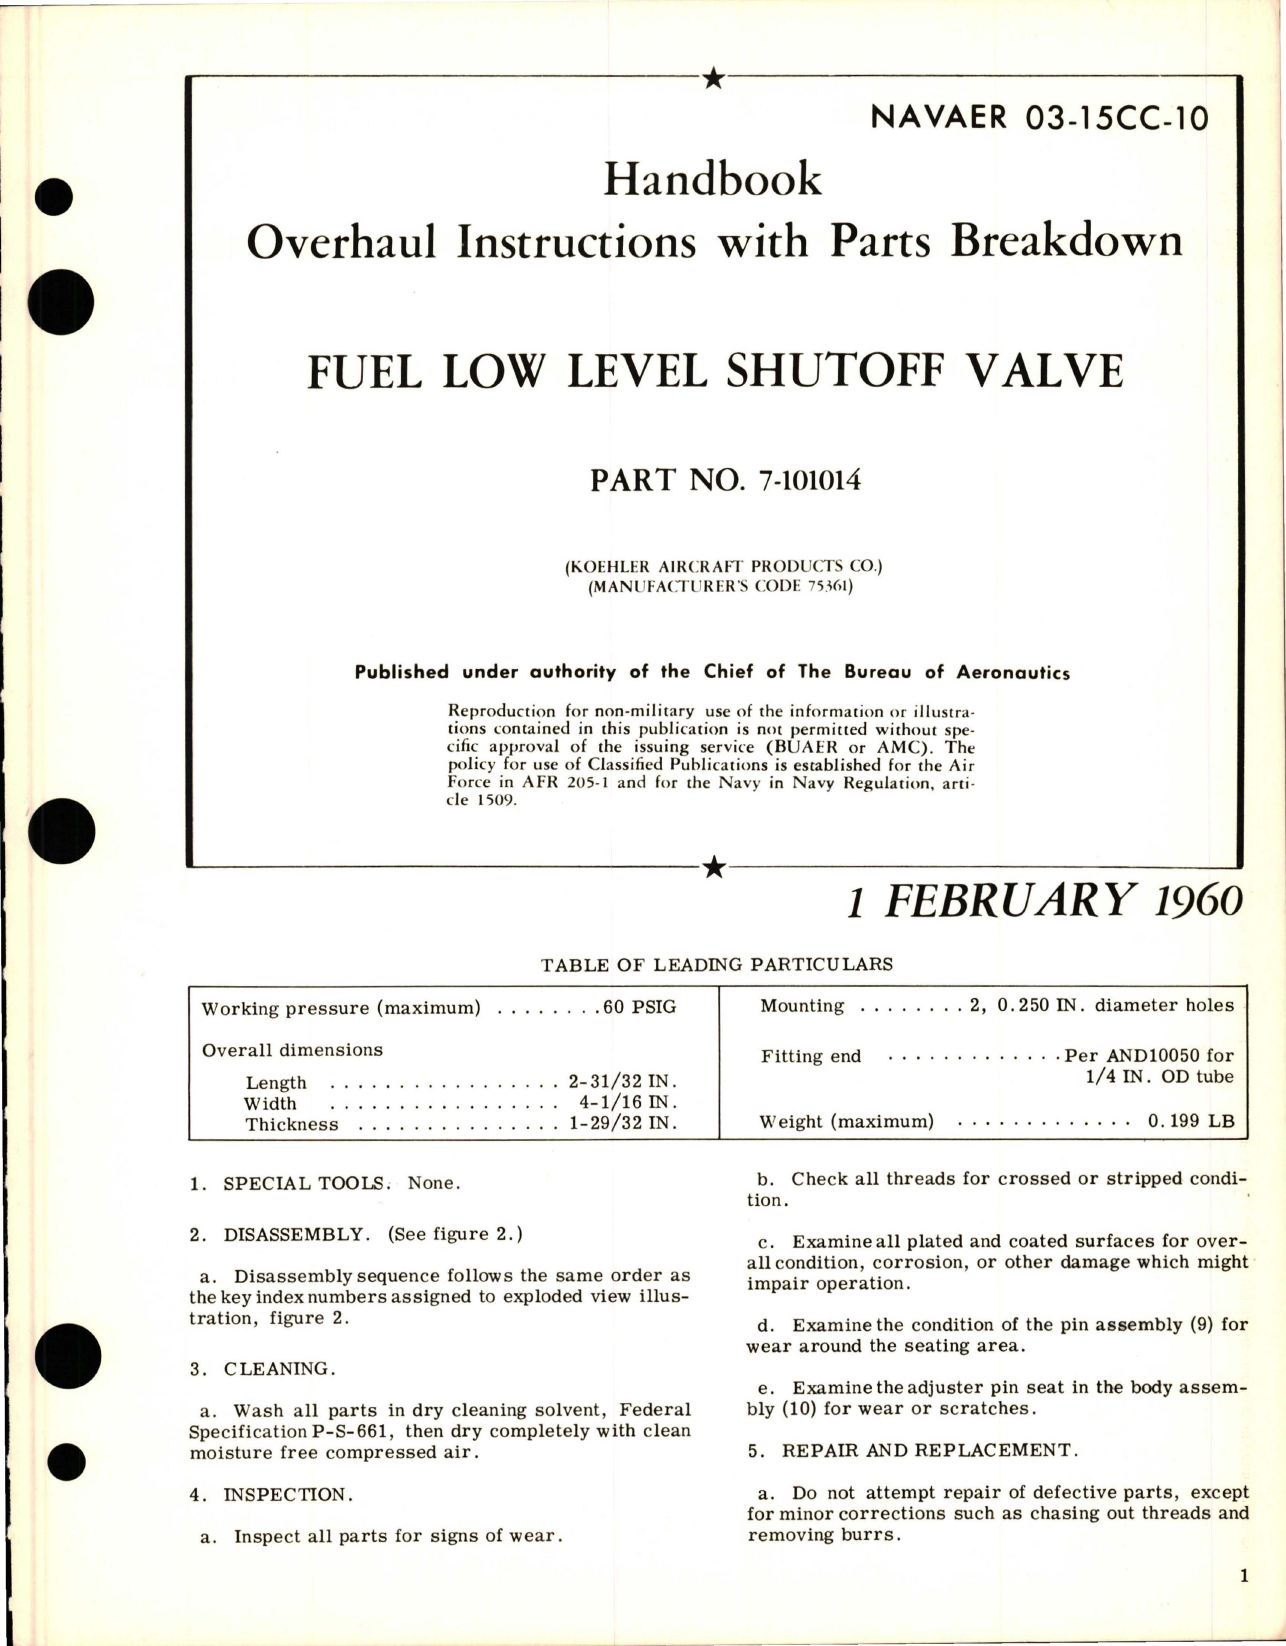 Sample page 1 from AirCorps Library document: Overhaul Instructions with Parts for Fuel Low Level Shutoff Valve - Part 7-101014